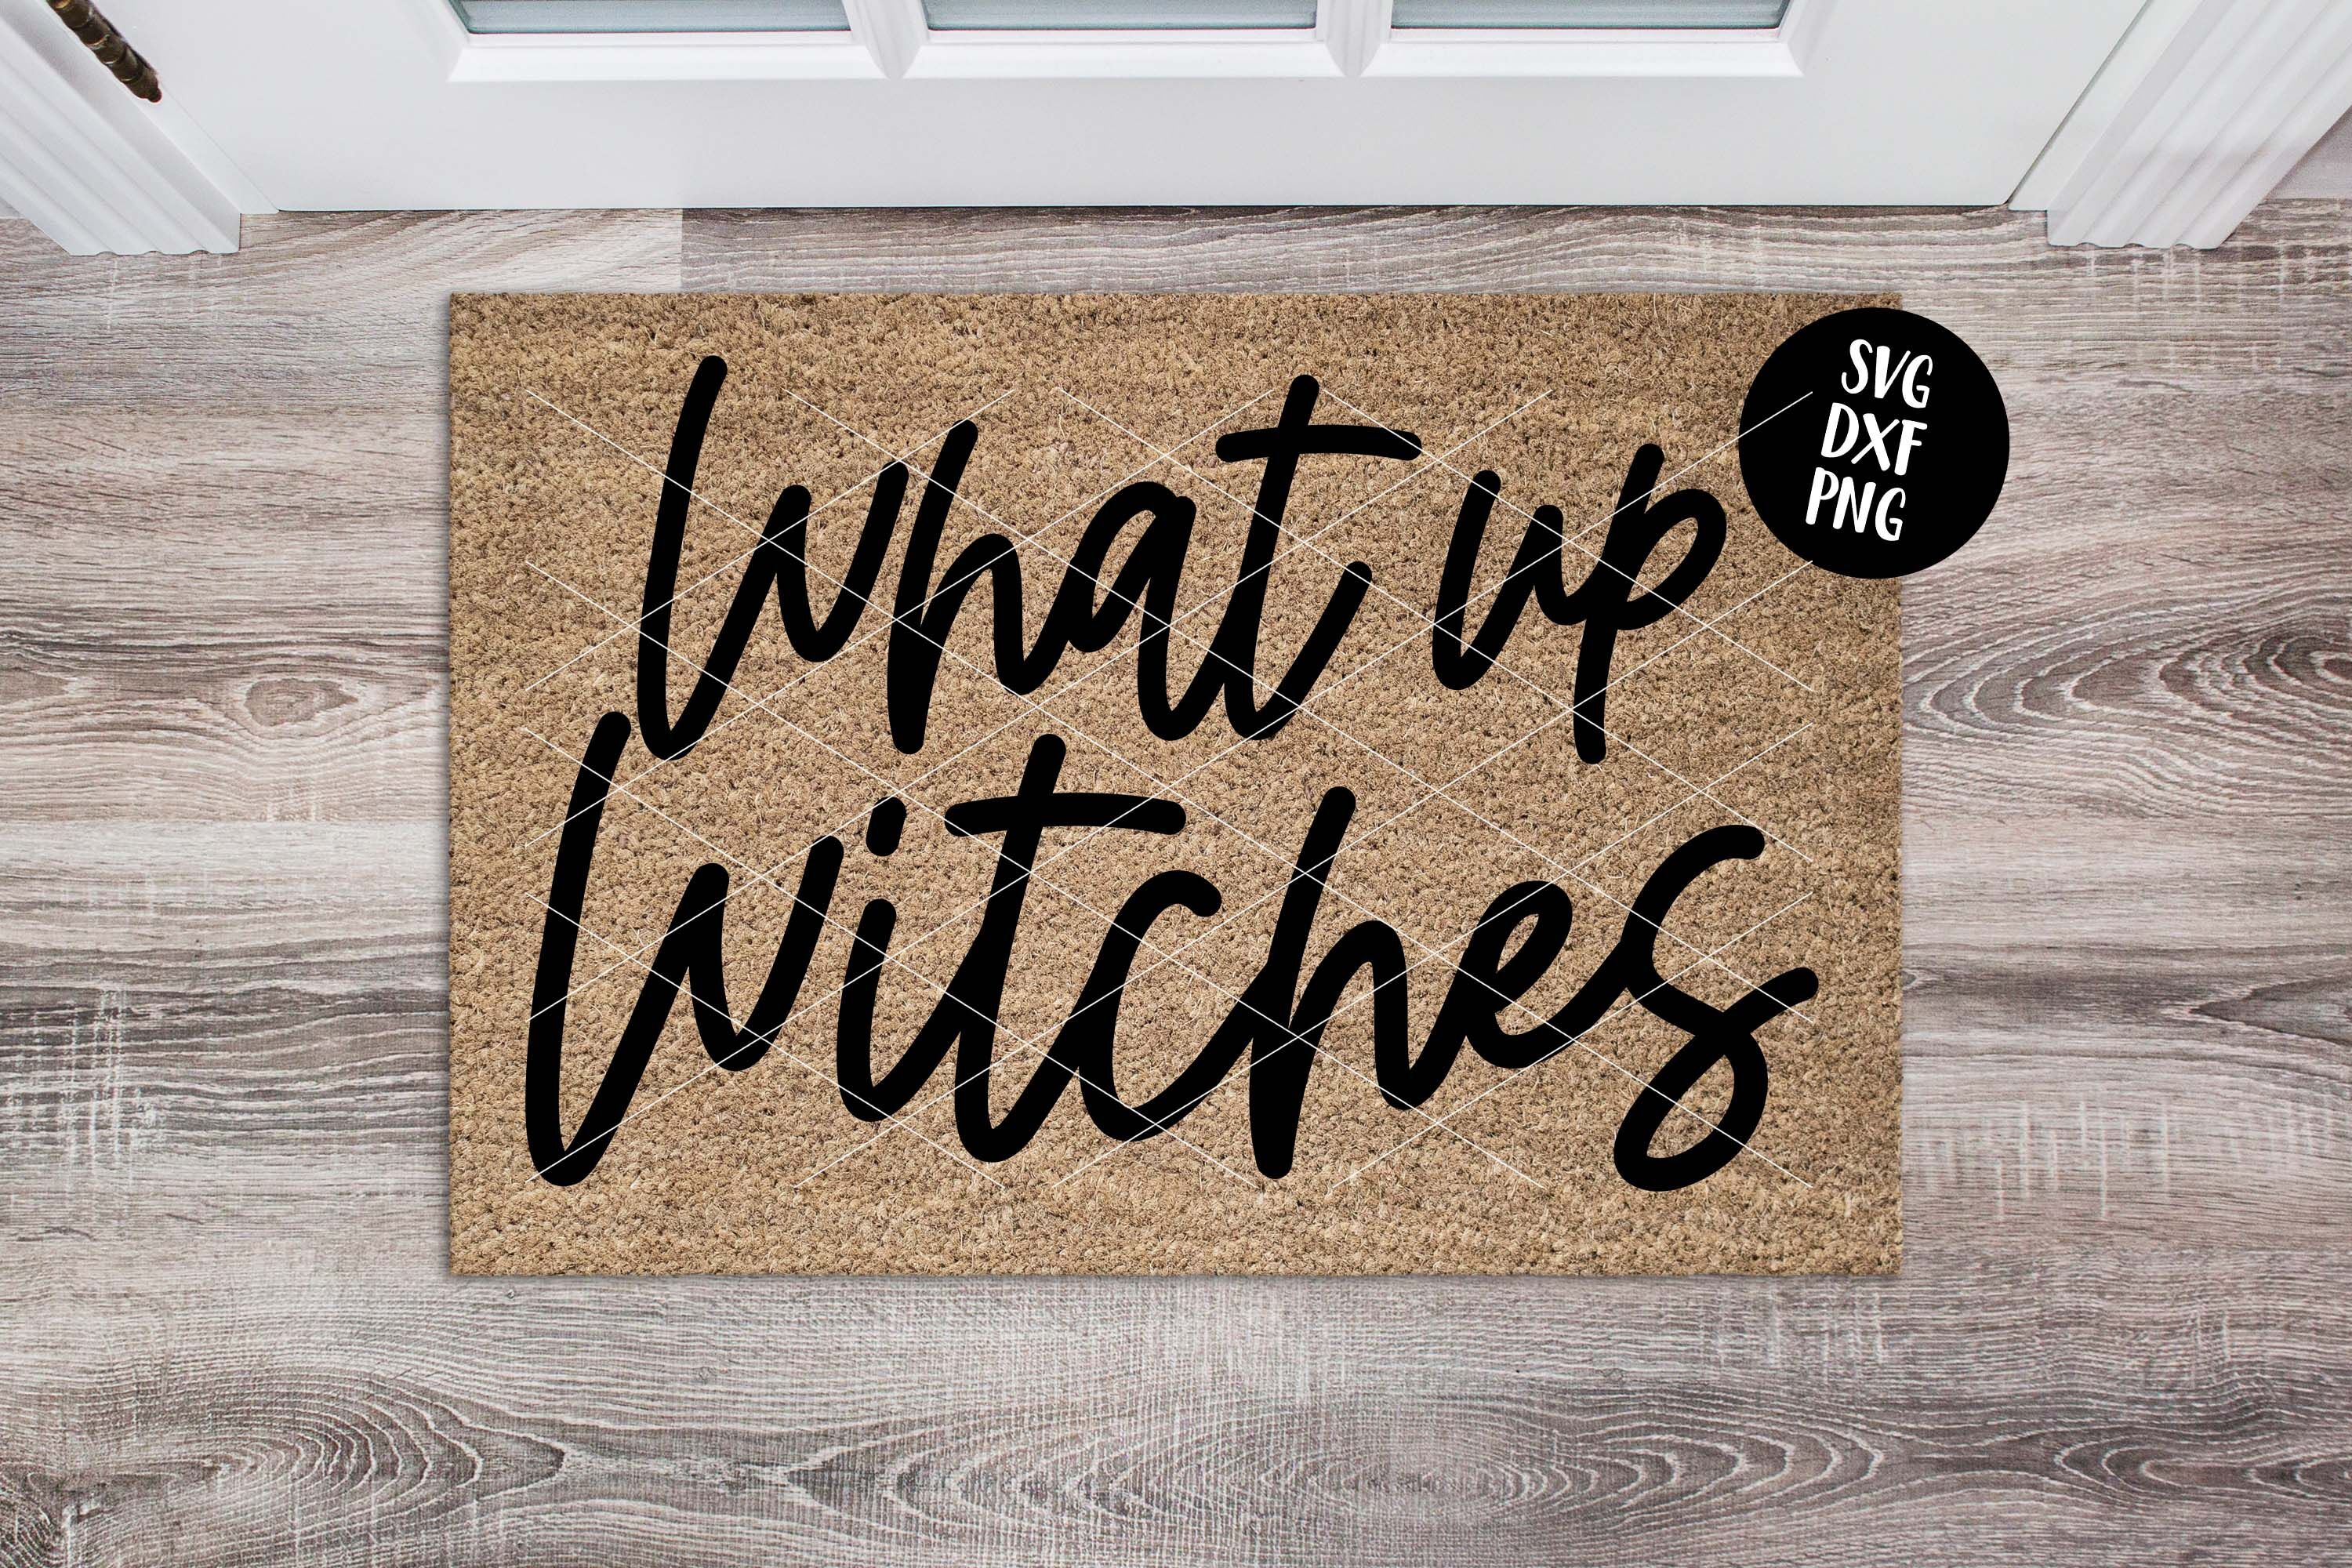 What Up Witches Halloween Doormat Svg Dxf Png By Svgfox Thehungryjpeg Com